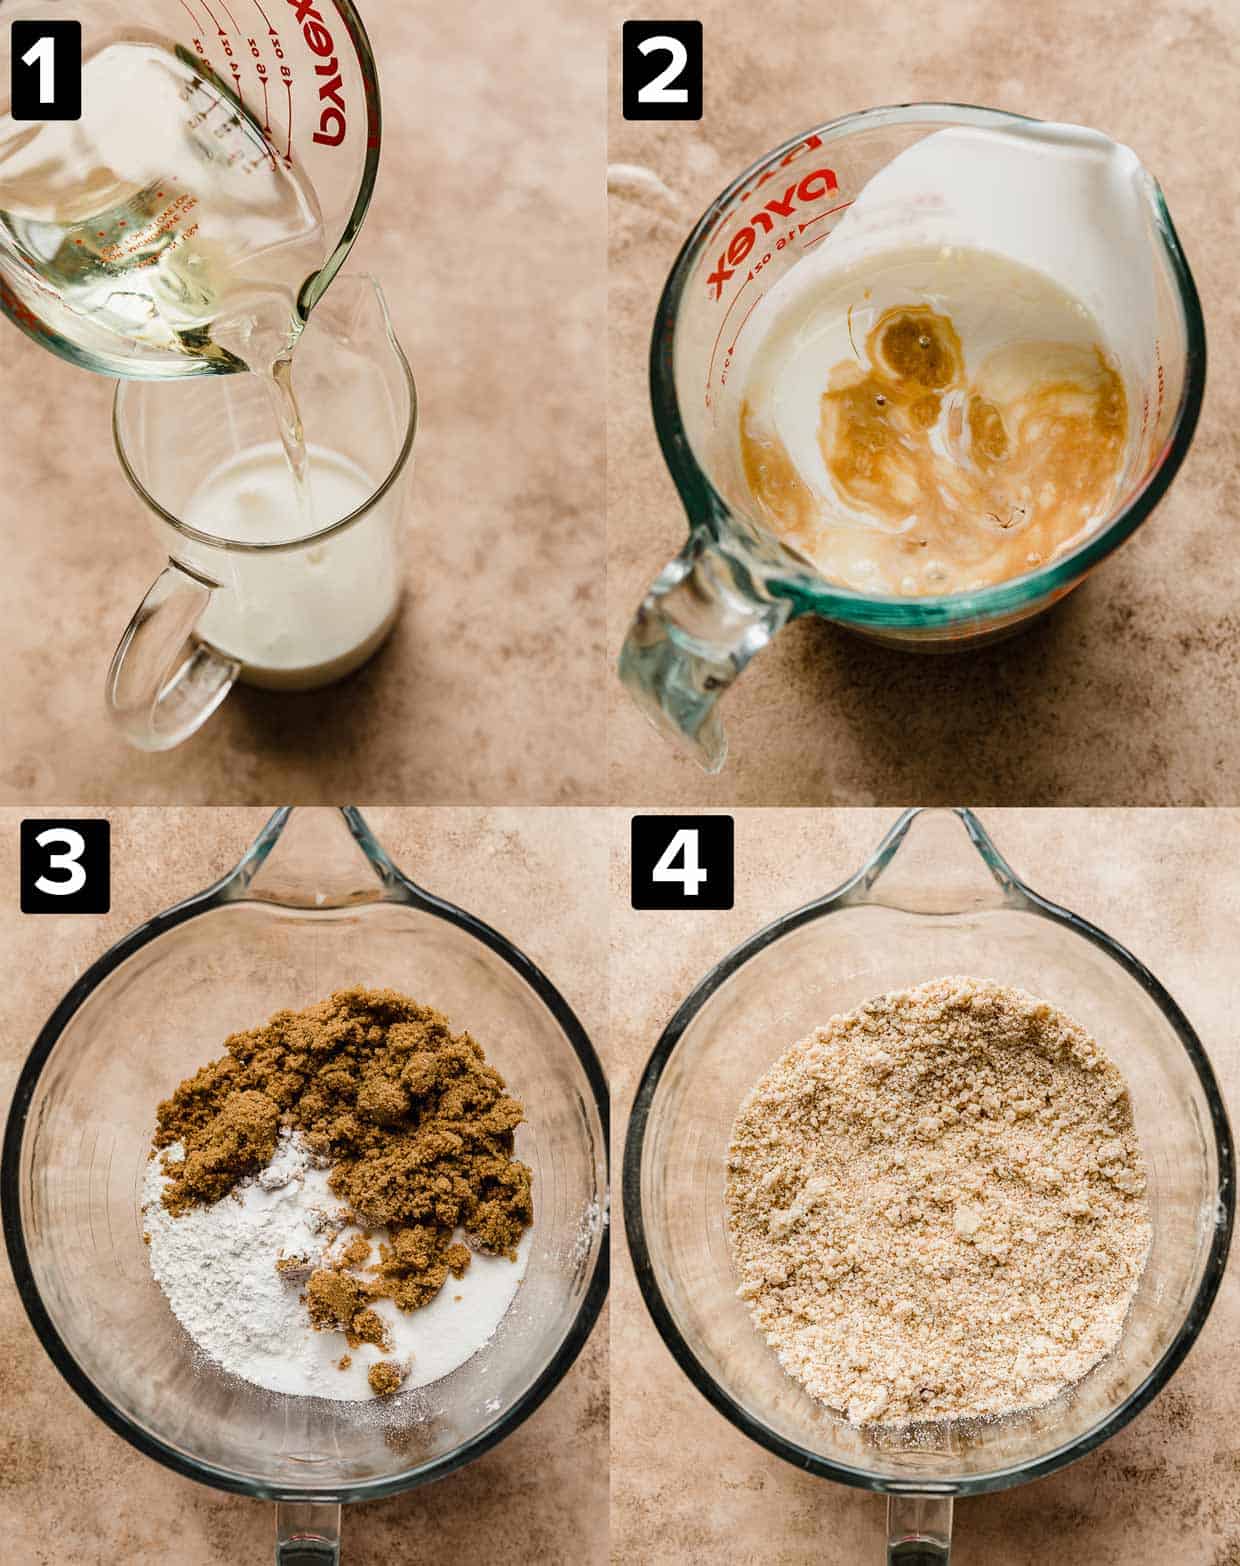 Four photos showing the making of Brown Butter Cake batter.